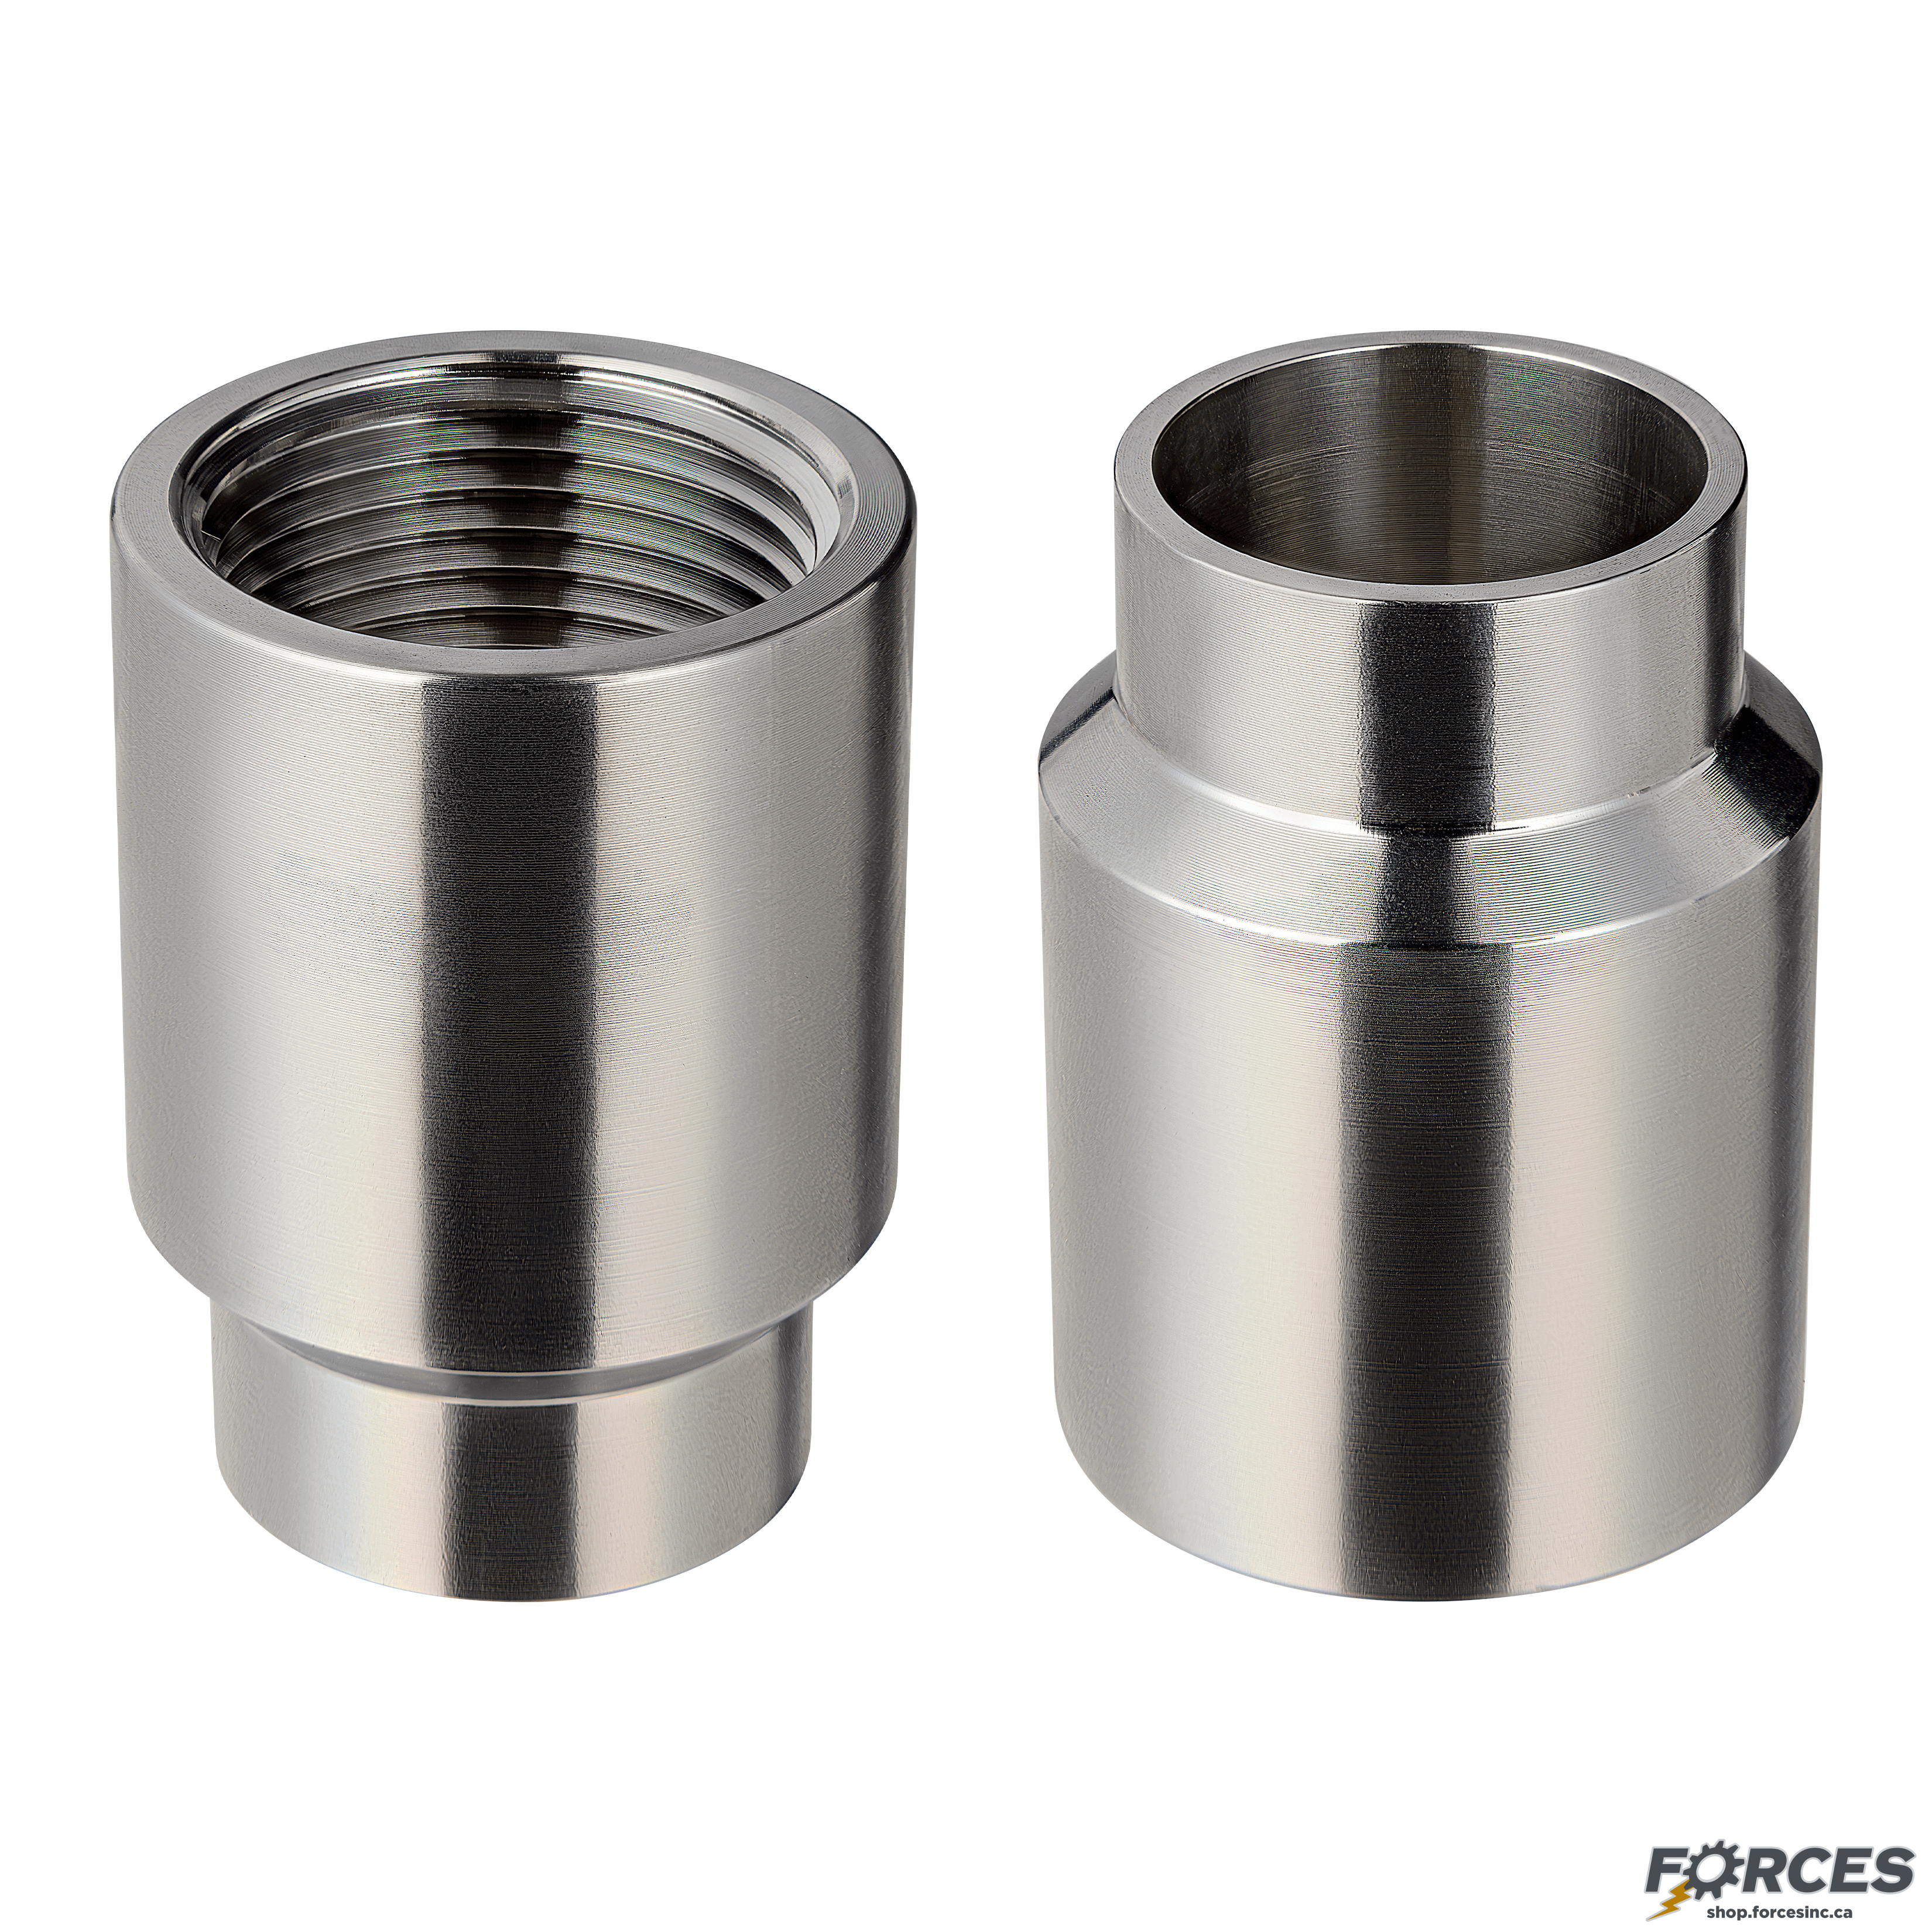 1" x 3/4" Butt Weld x Female NPT Adapter - Stainless Steel 316 - Forces Inc